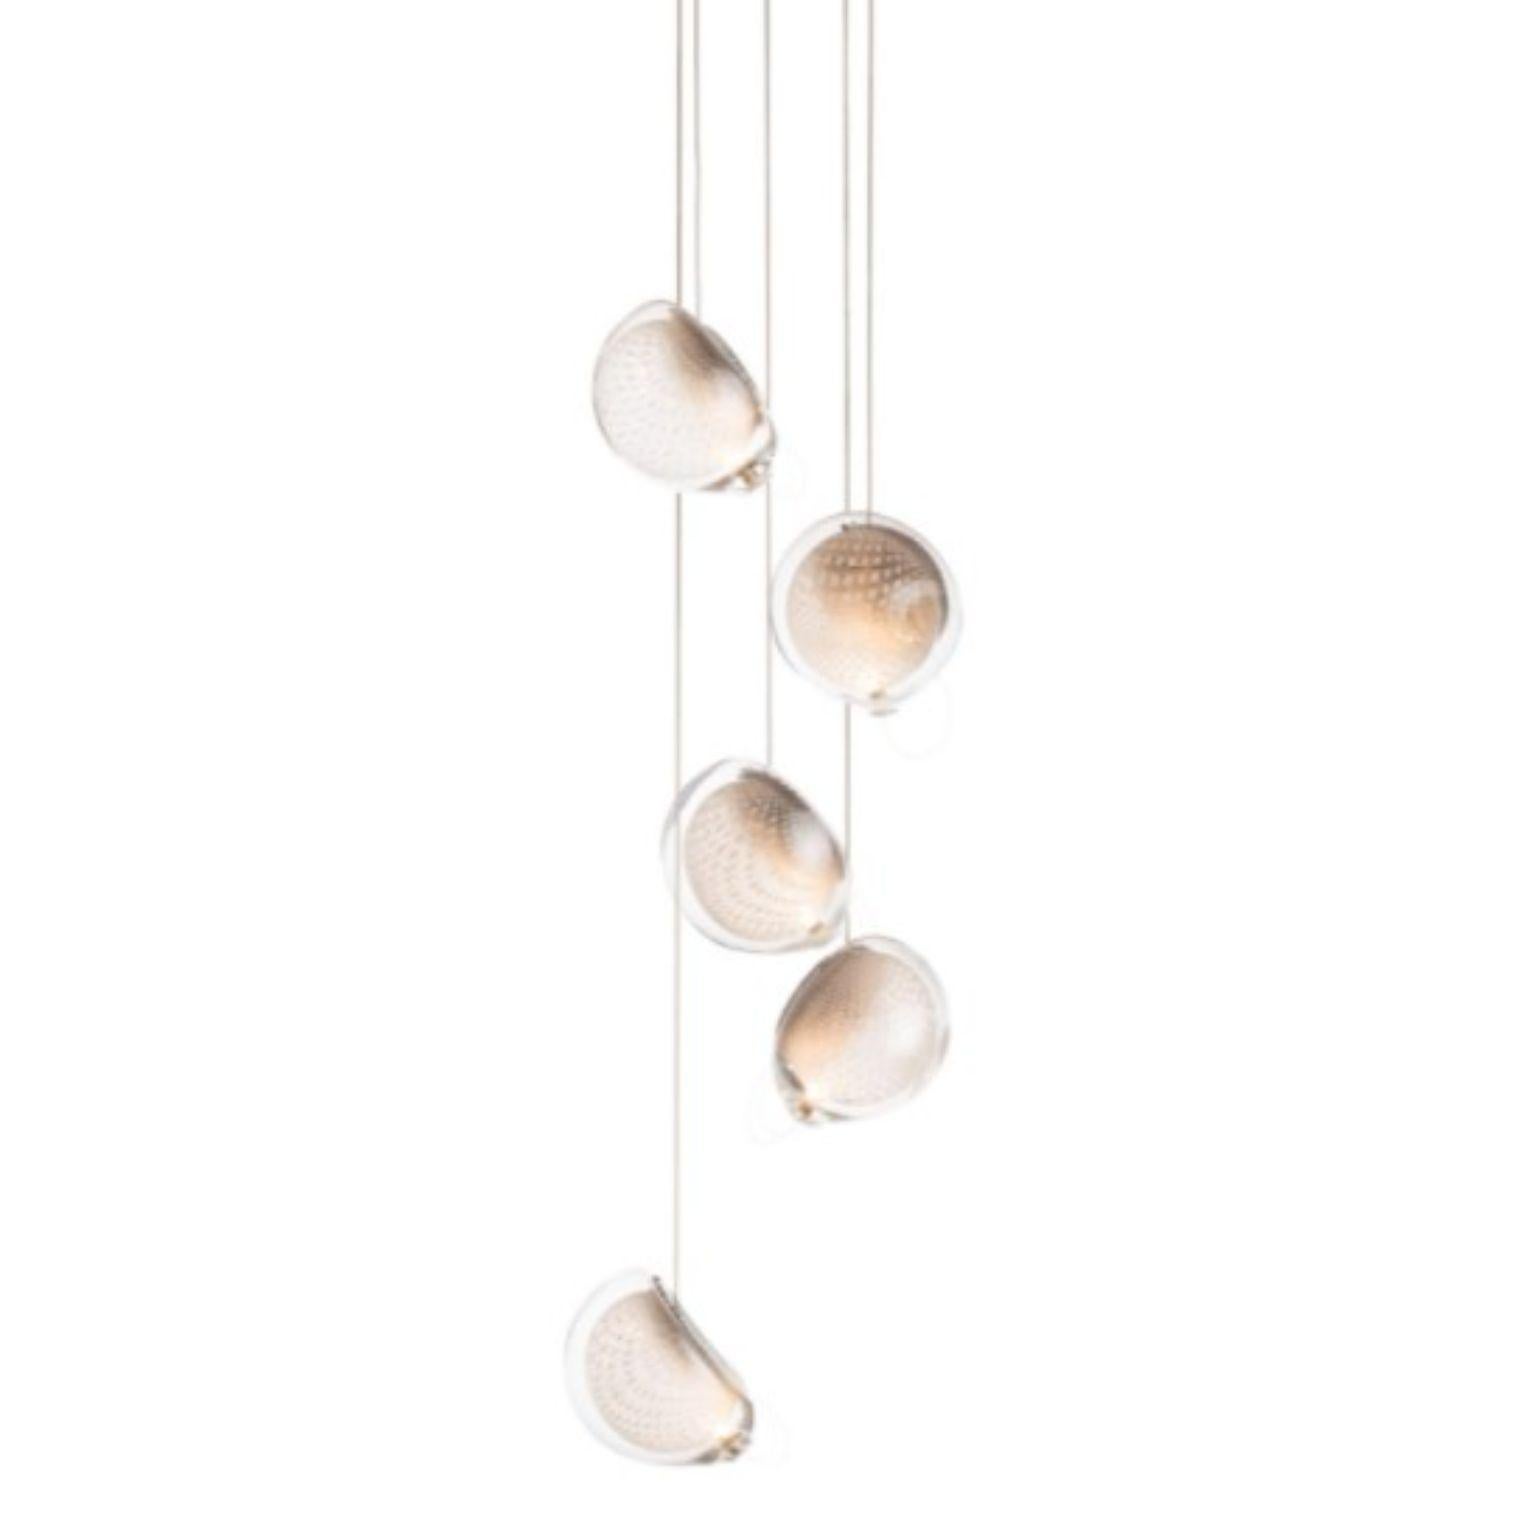 76.5 Pendant by Bocci
Dimensions: D15.2 x H300 cm
Materials: brushed nickel round canopy
Weight: 3.4 kg
Also Available in different dimensions.

All our lamps can be wired according to each country. If sold to the USA it will be wired for the